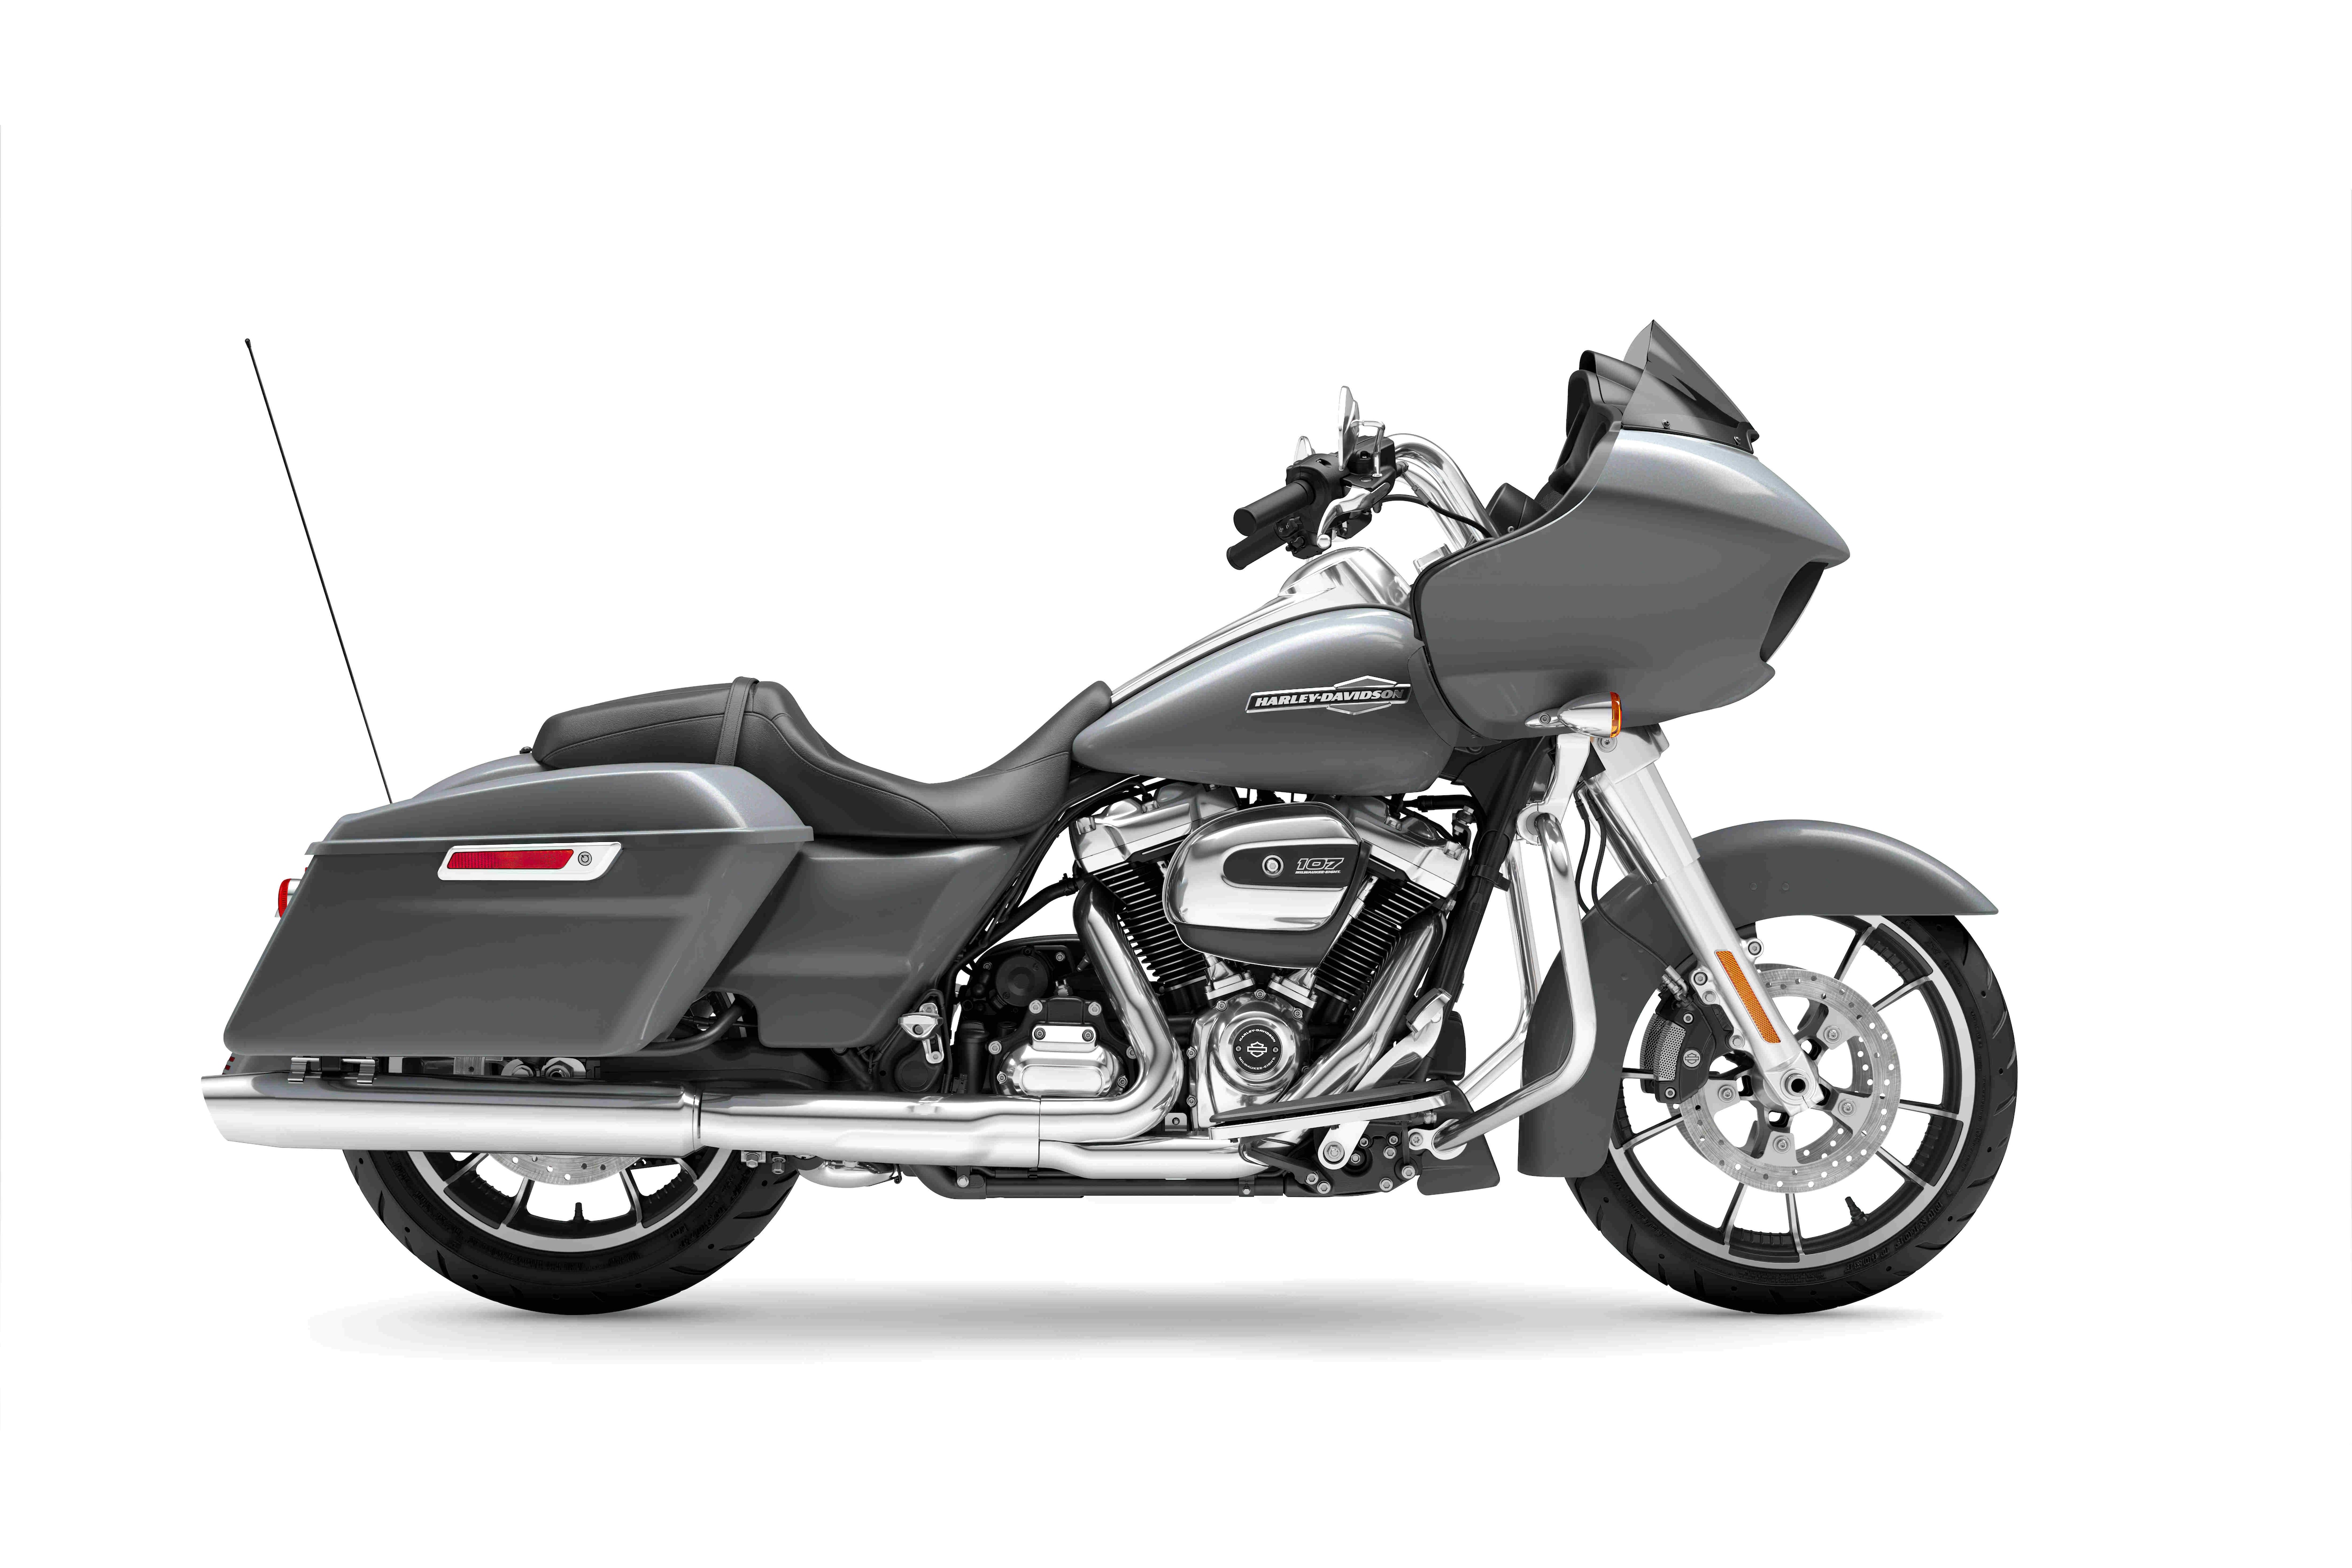 The 2024 Harley-Davidson Road Glide and Street Glide get a host of upgrades including the revised 117 Milwaukee engine, new infotainment screen, as well as improved aerodynamics